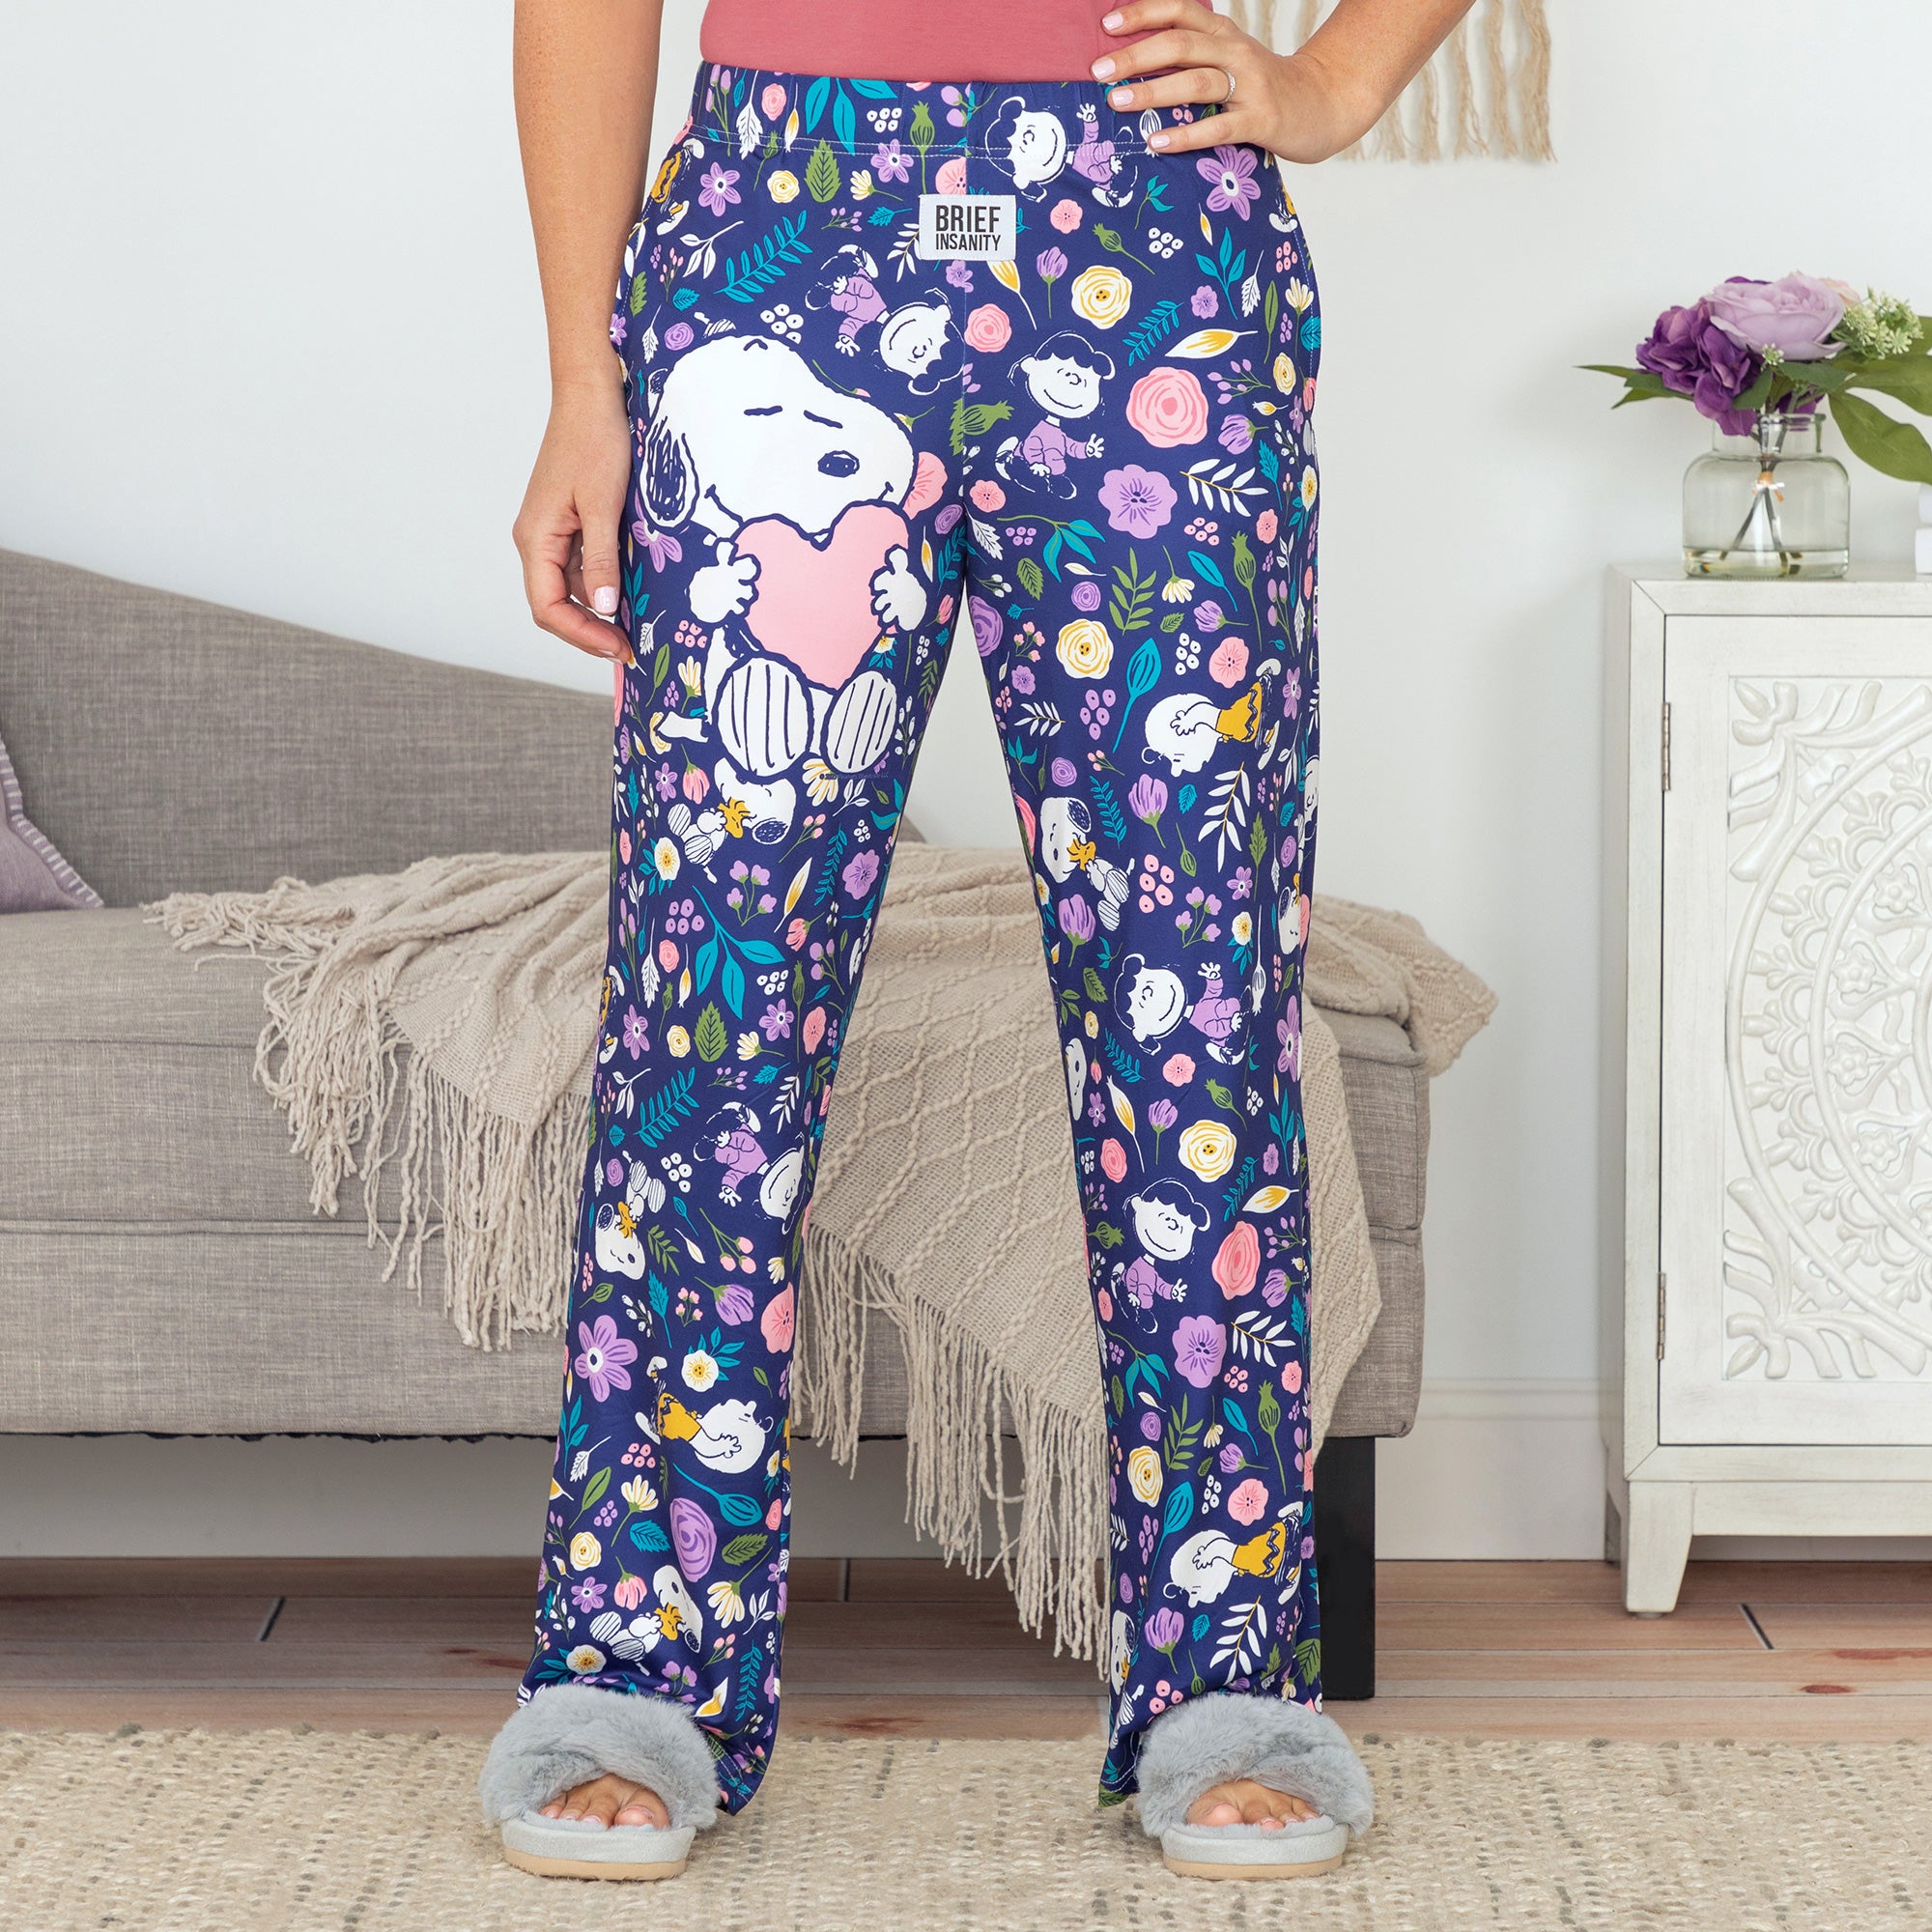 Snoopy Lounge Pants - Floral Love - M